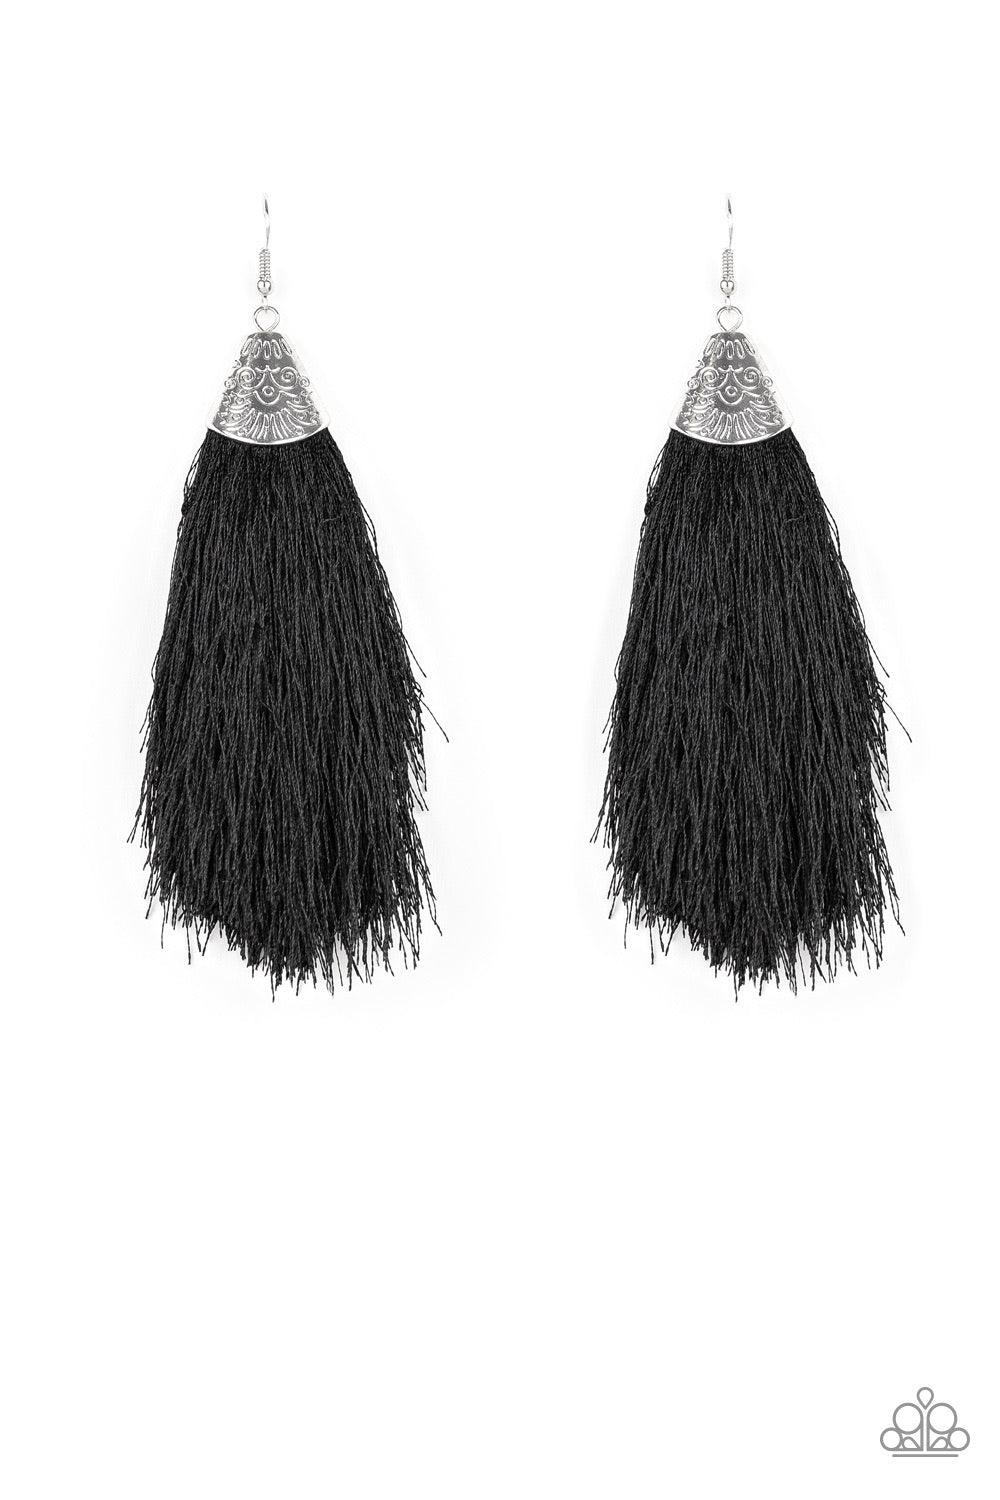 Paparazzi Accessories Tassel Temptress ~Black A plume of soft black thread is pinched between a shimmery silver fitting stamped in tribal inspired textures, creating a foxy tassel. Earring attaches to a standard fishhook fitting. Jewelry